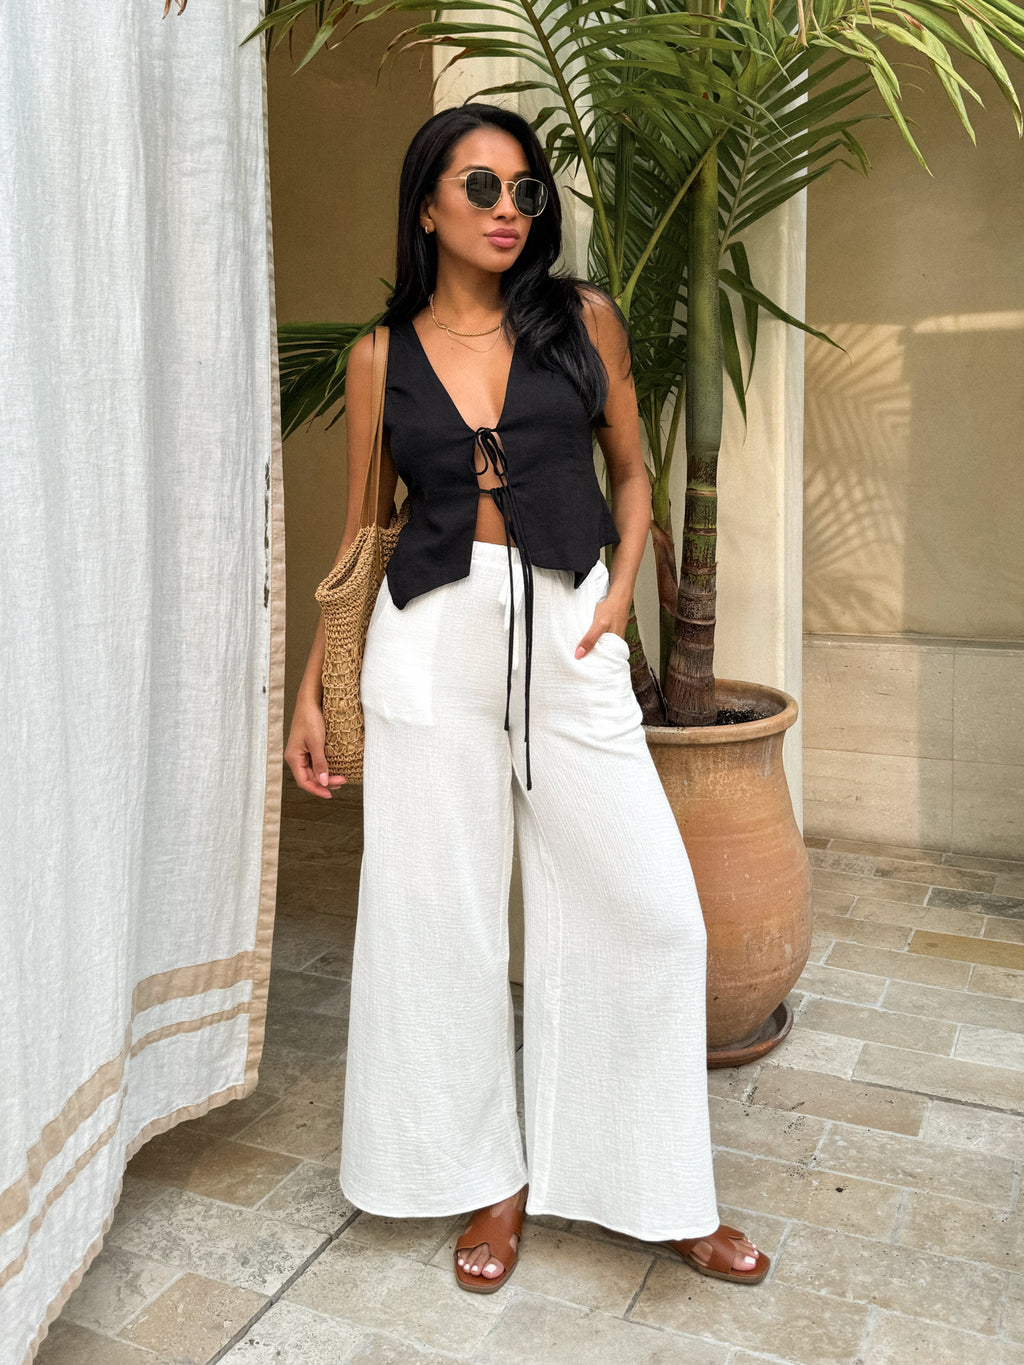 Pina Colada Gauze Pants in White - Stitch And Feather